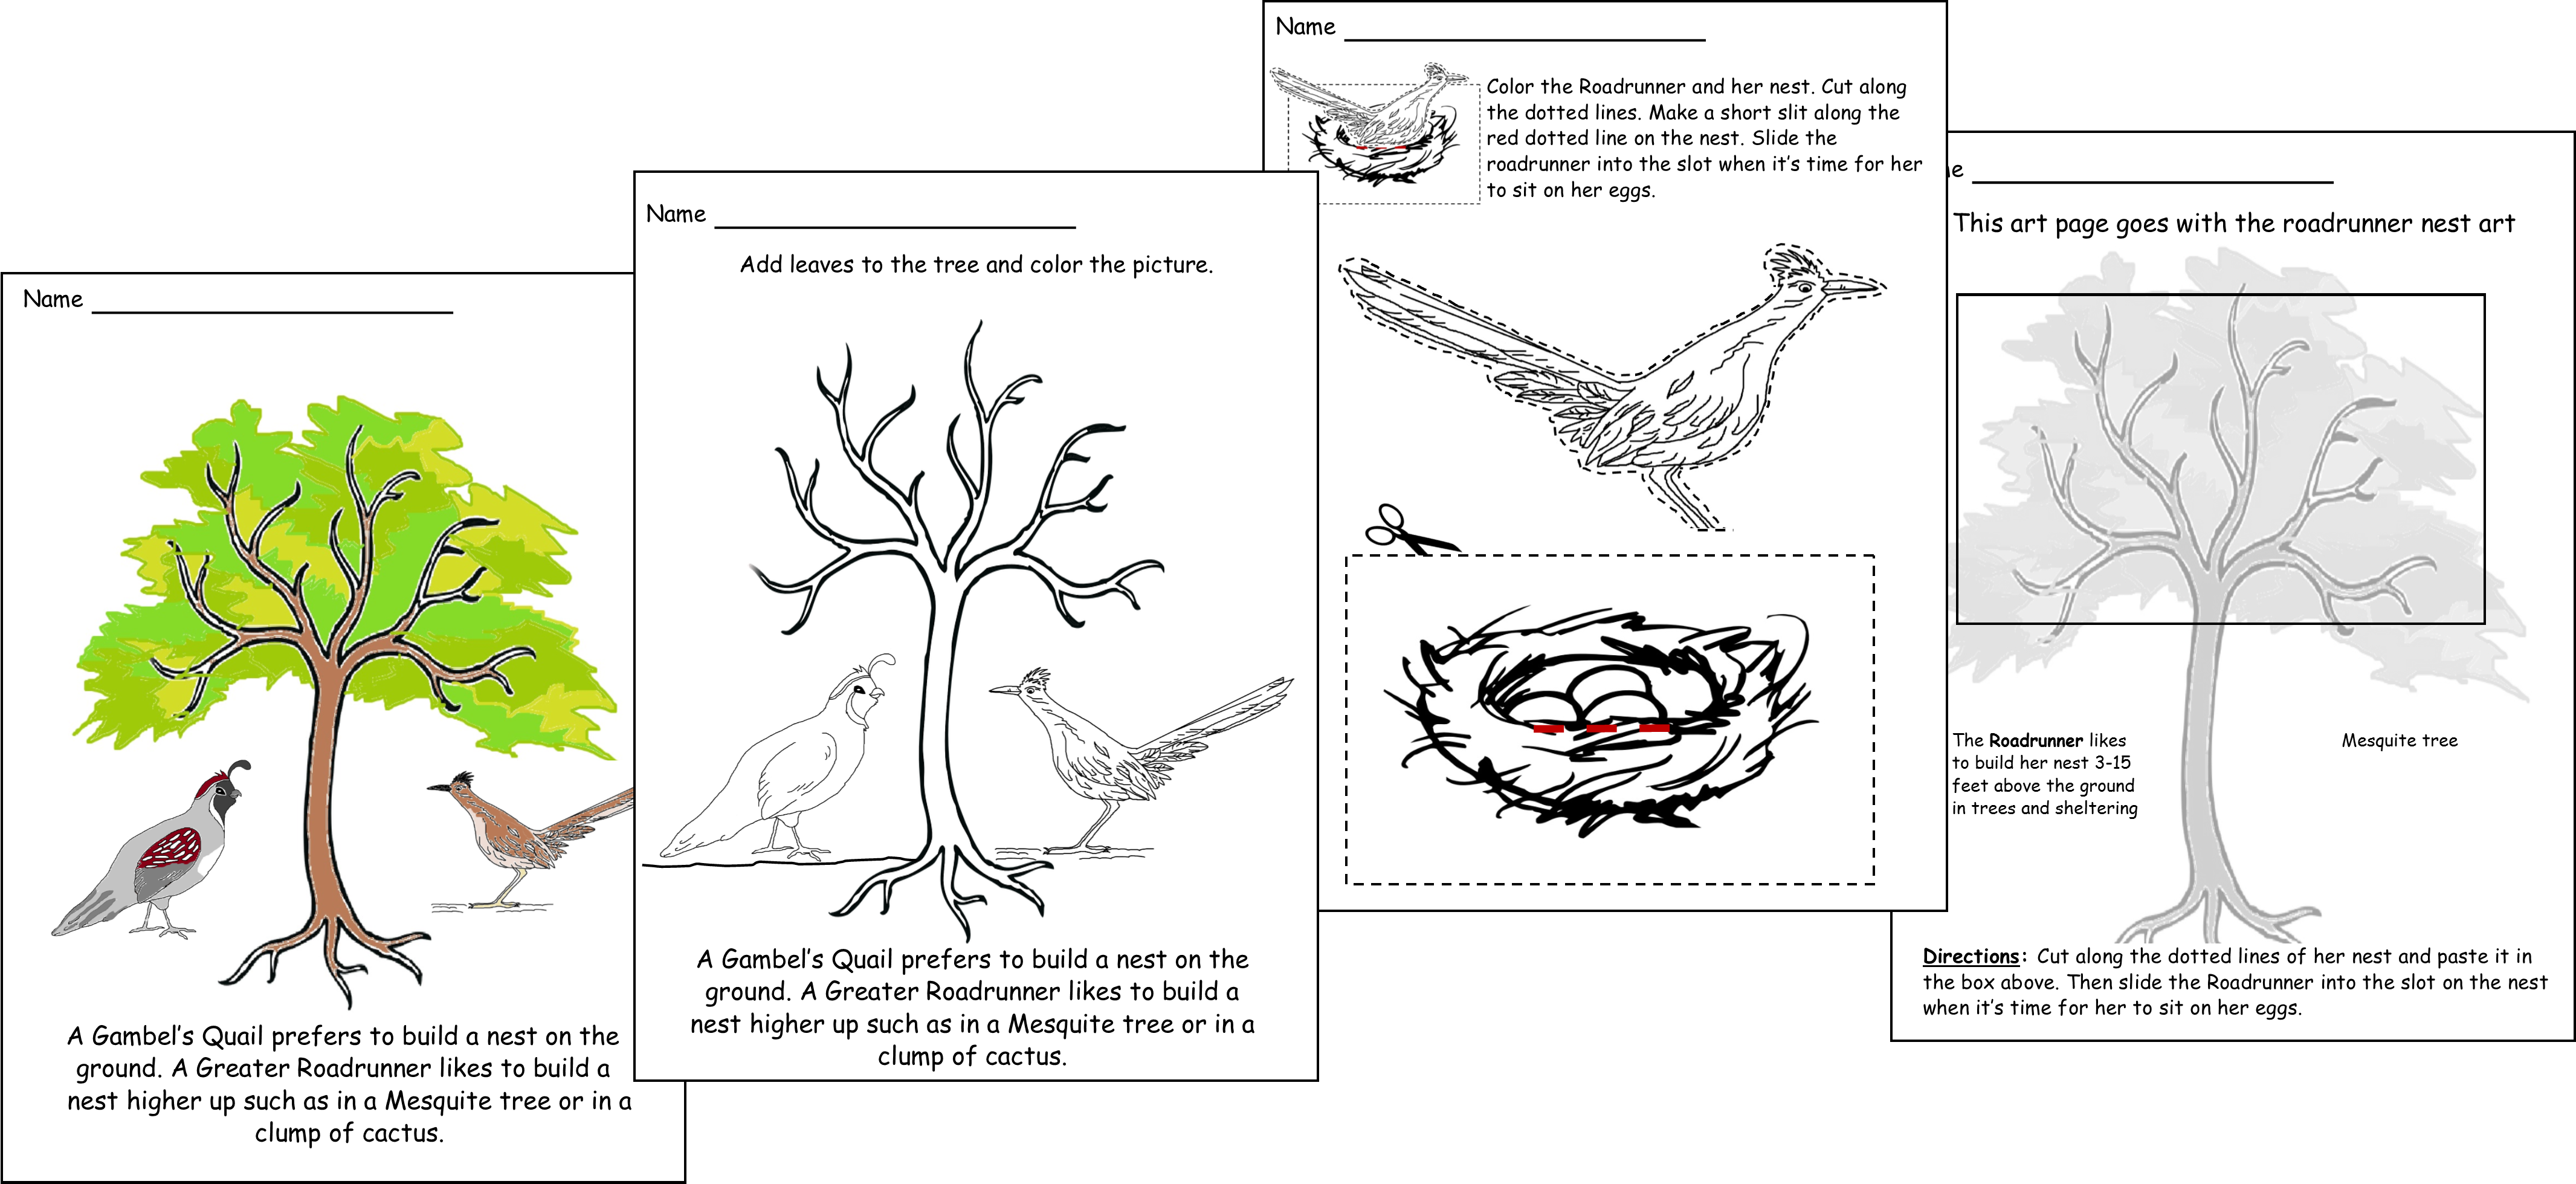 Black And White Drawings About The Greater Roadrunner